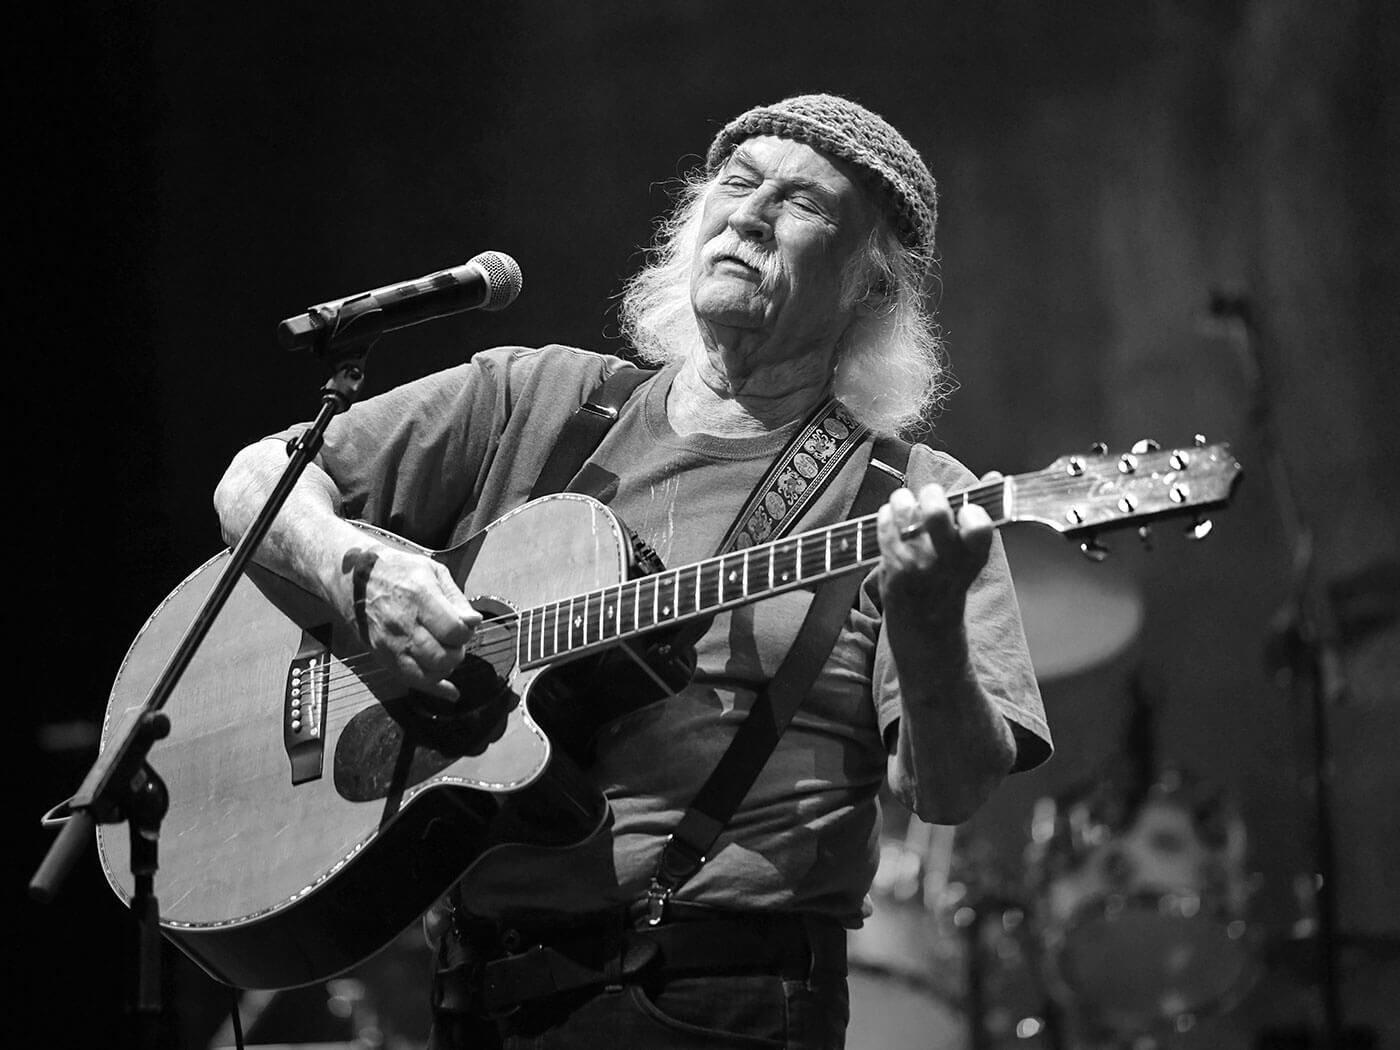 The minute you do have an idea, you have to go for it”: David Crosby on creativity during quarantine. Guitar.com. All Things Guitar